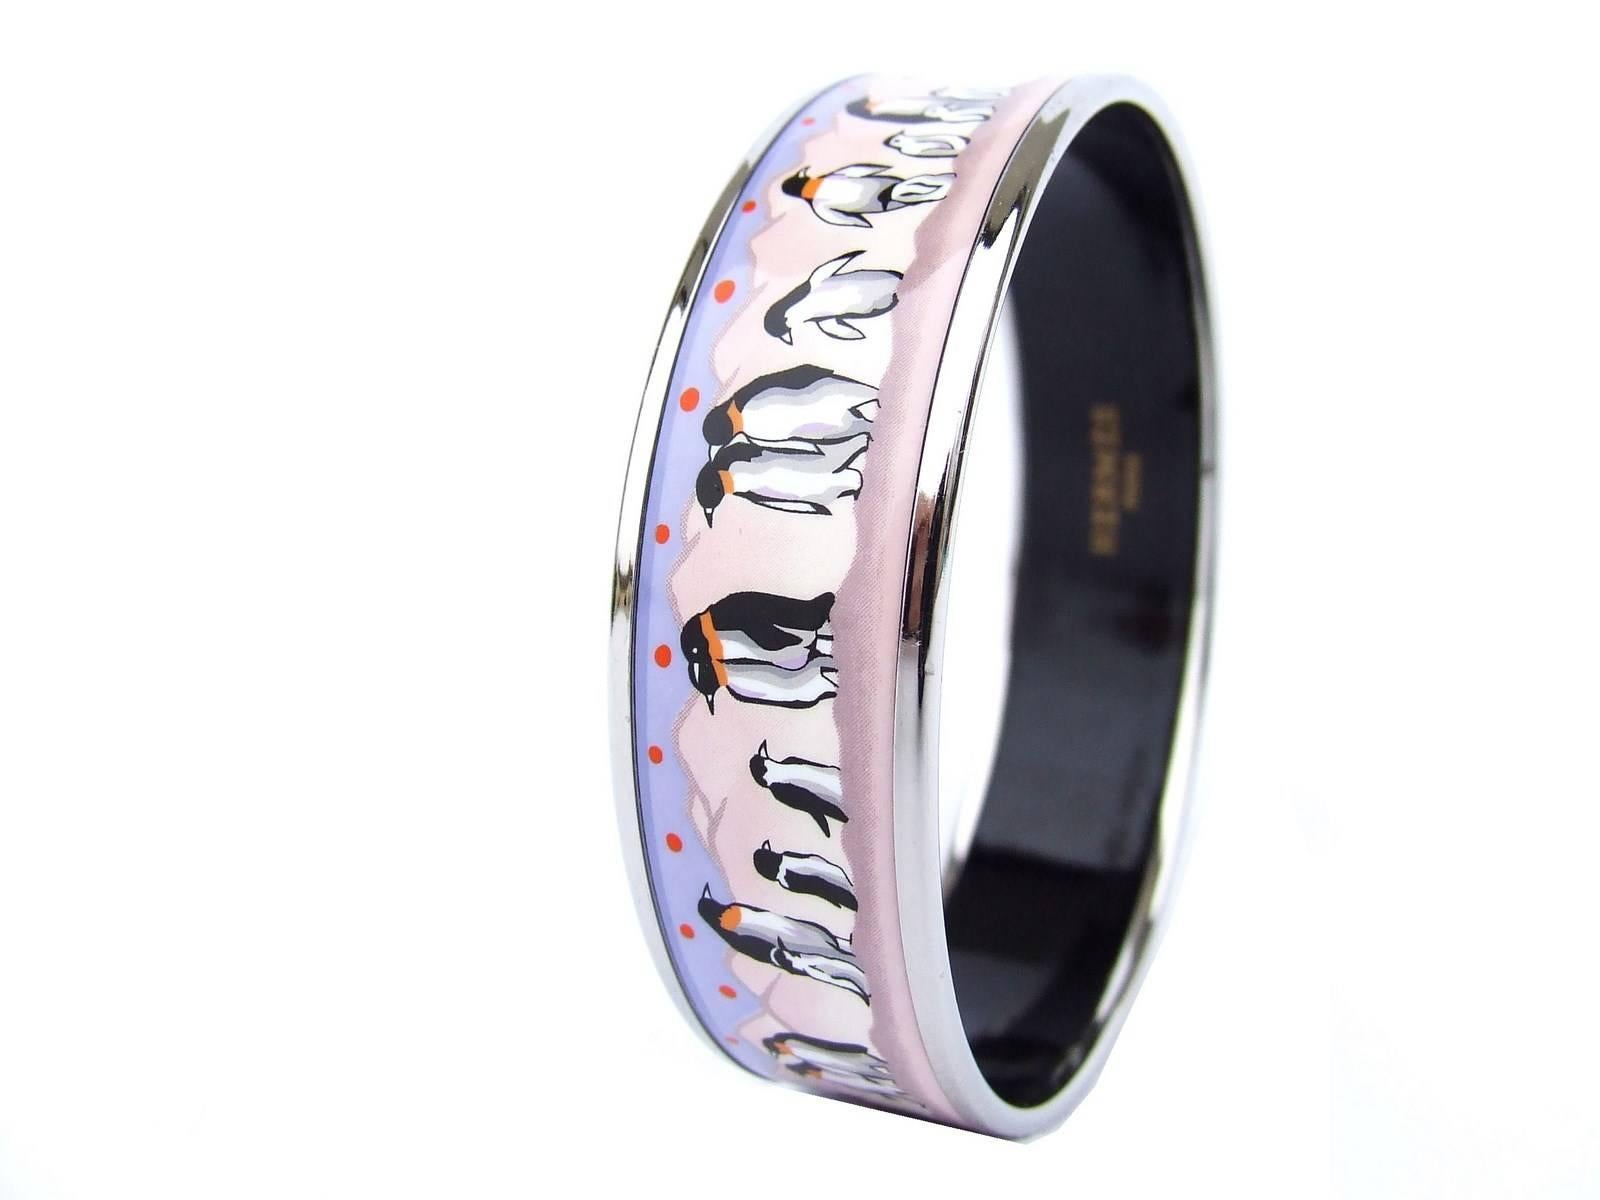 BEAUTIFUL AUTHENTIC HERMES BRACELET

 

Patter: Penguins on ice

 

Very Rare and gorgeous bracelet

 

Made in Austria, stamp E

 

Made of Enamel, Silver and Palladium plated hardware

 

Colors: Pink backgground, Pulrple Sky,